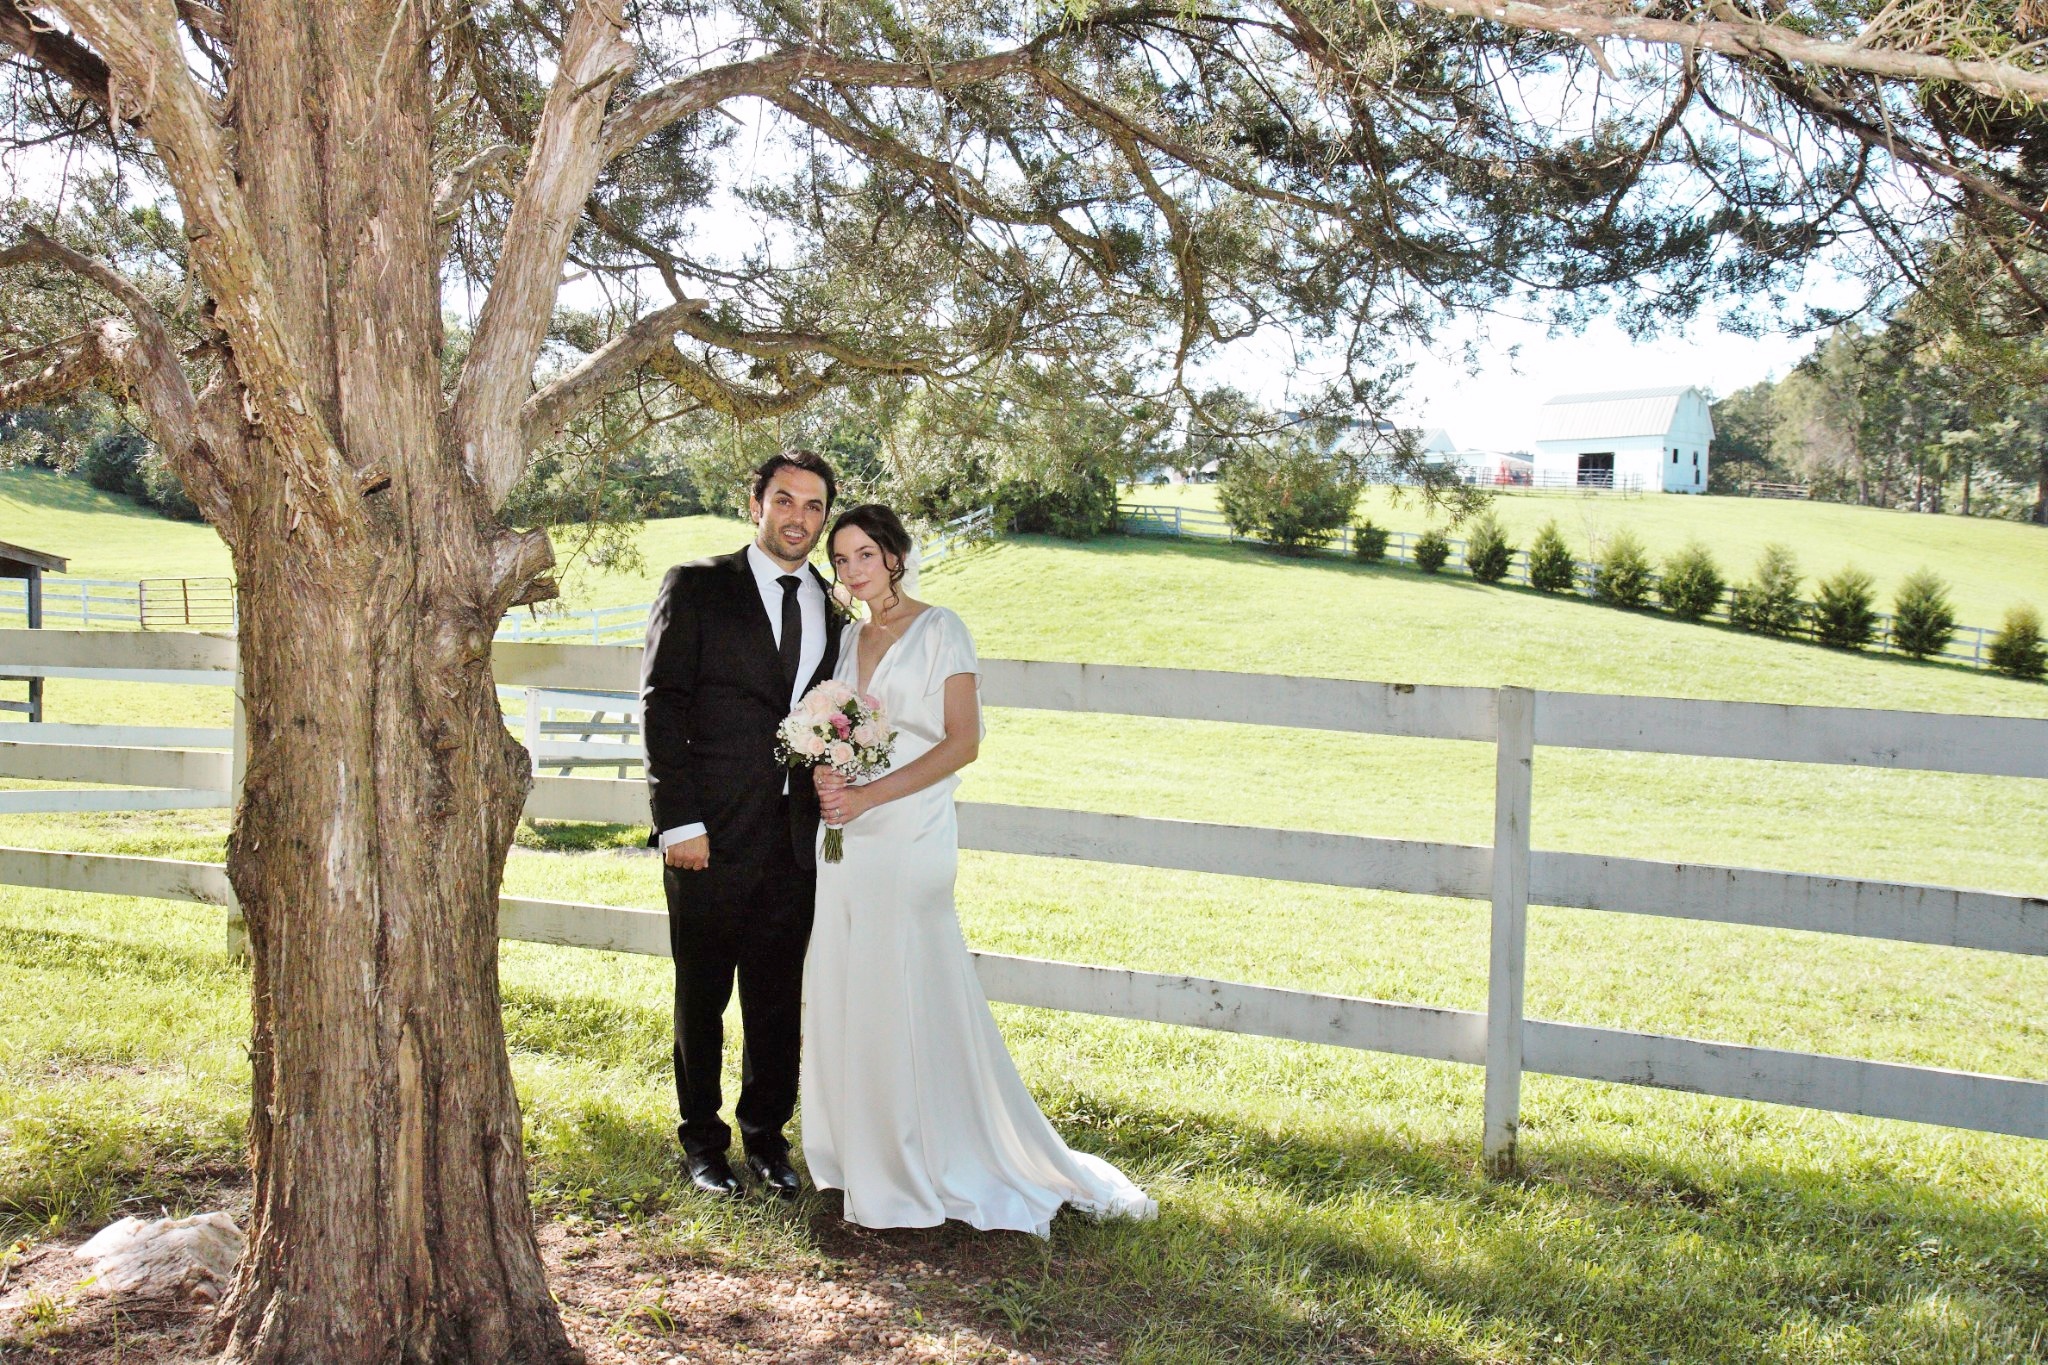 Bride and groom posing next to old cedar tree in front of pasture.